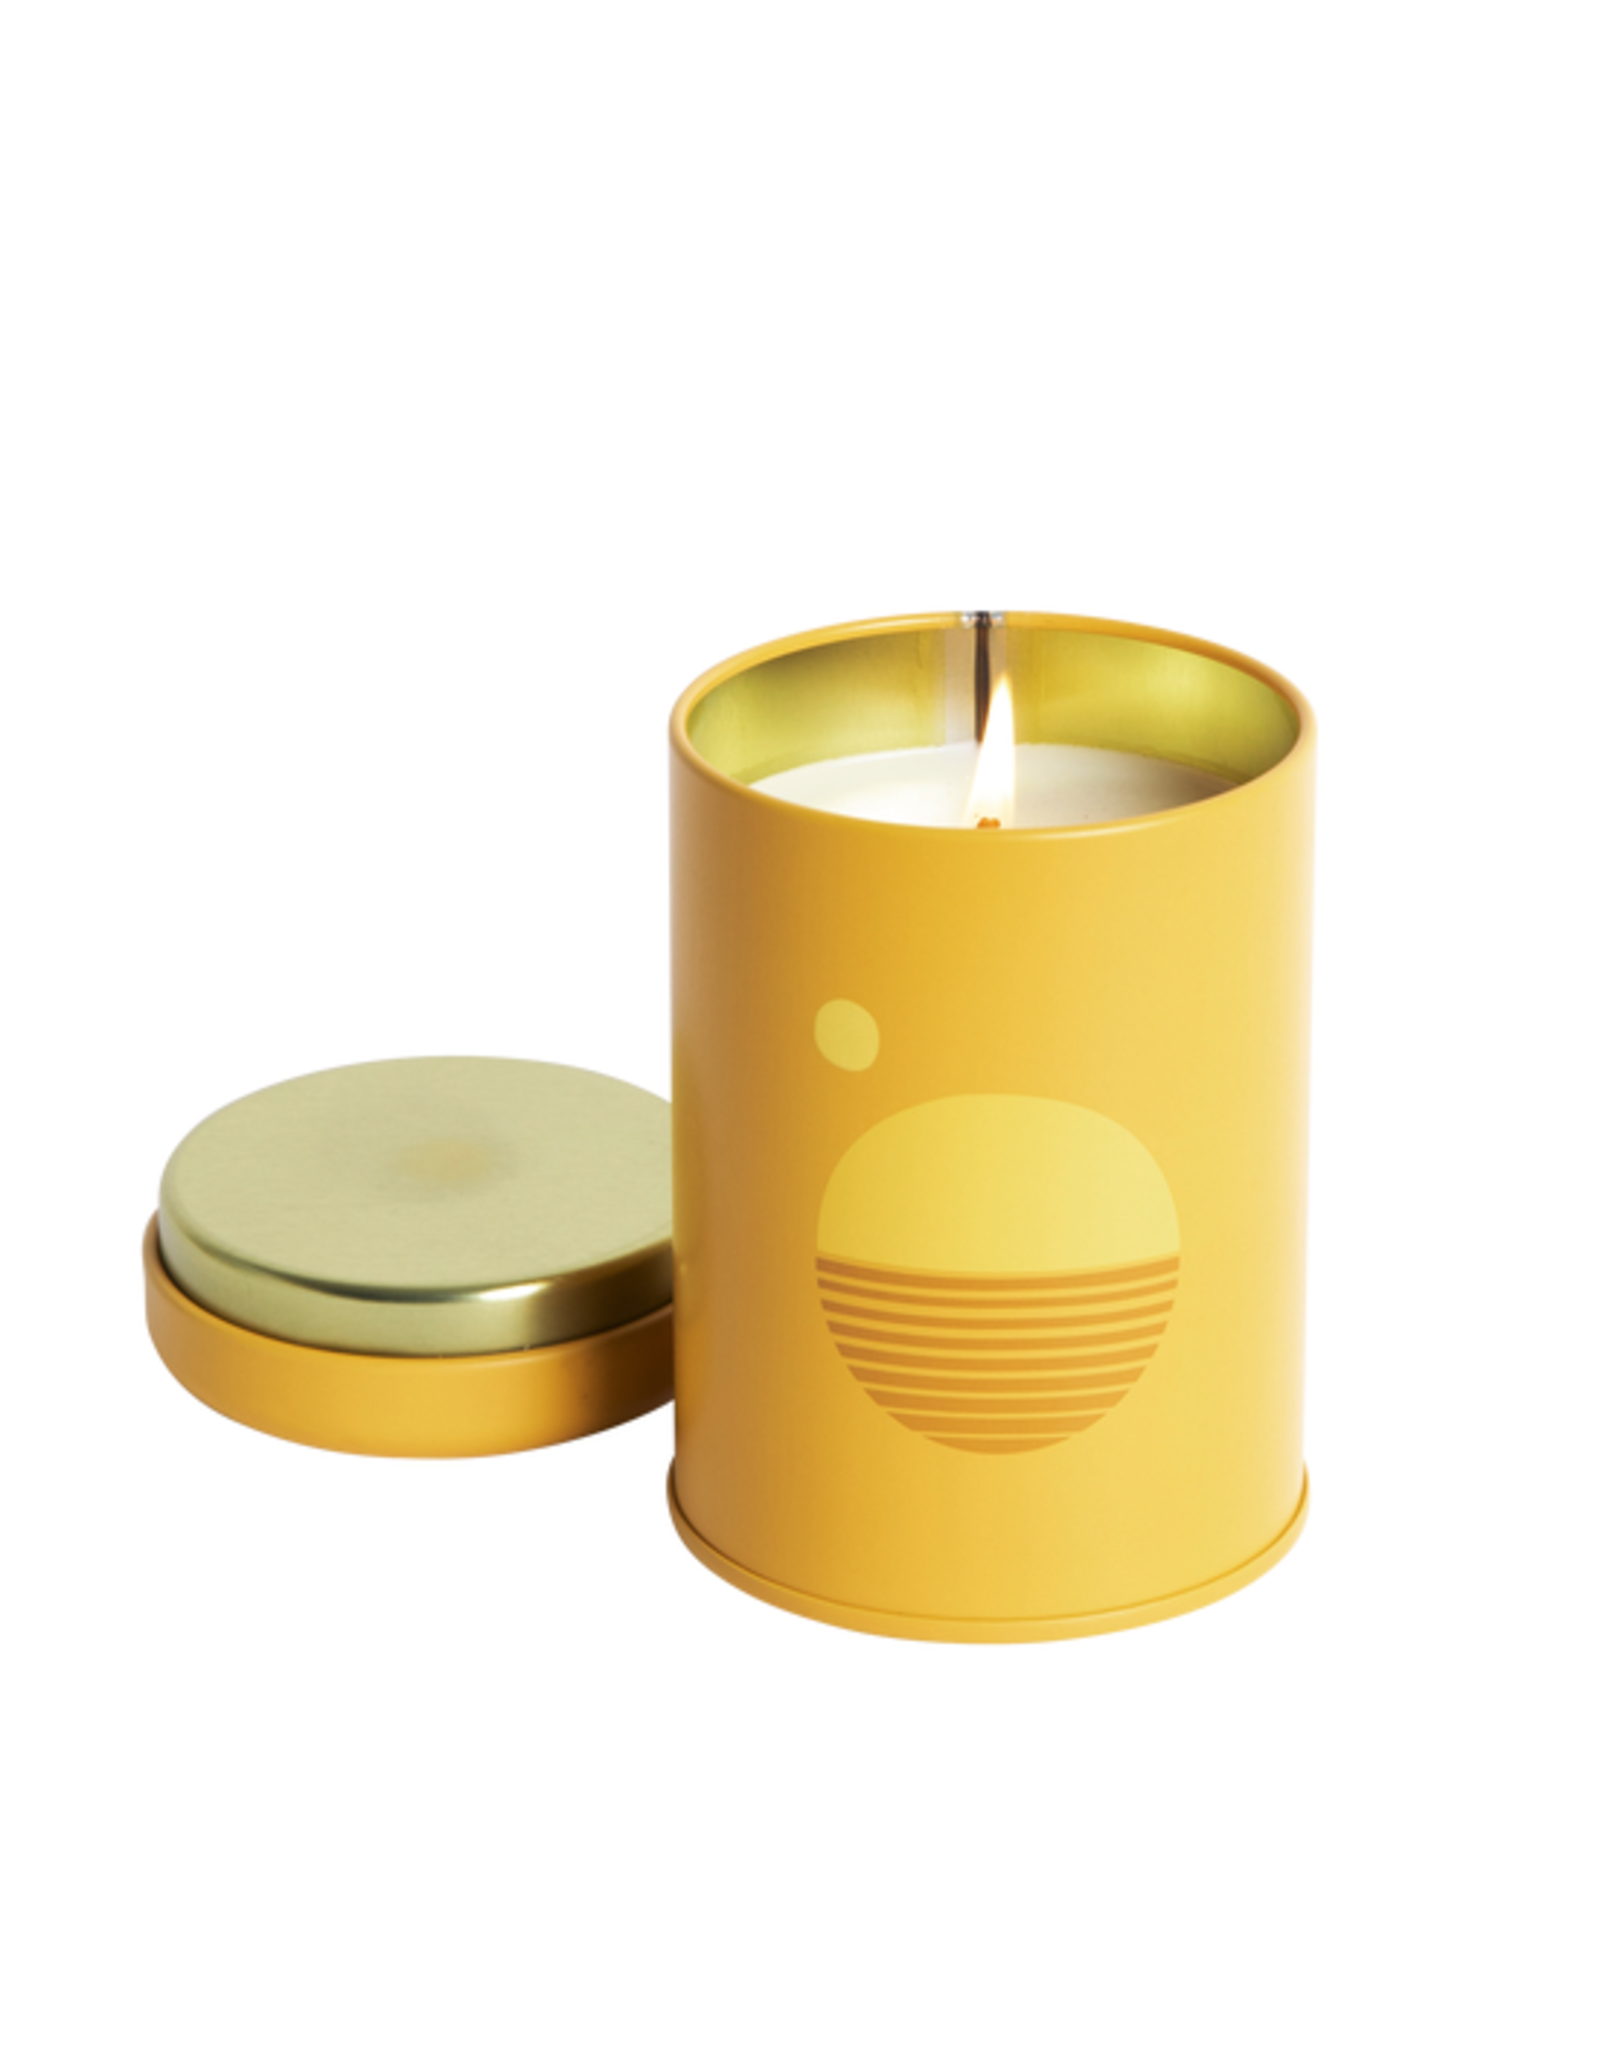 10 oz Sunset Candle - Golden Hour